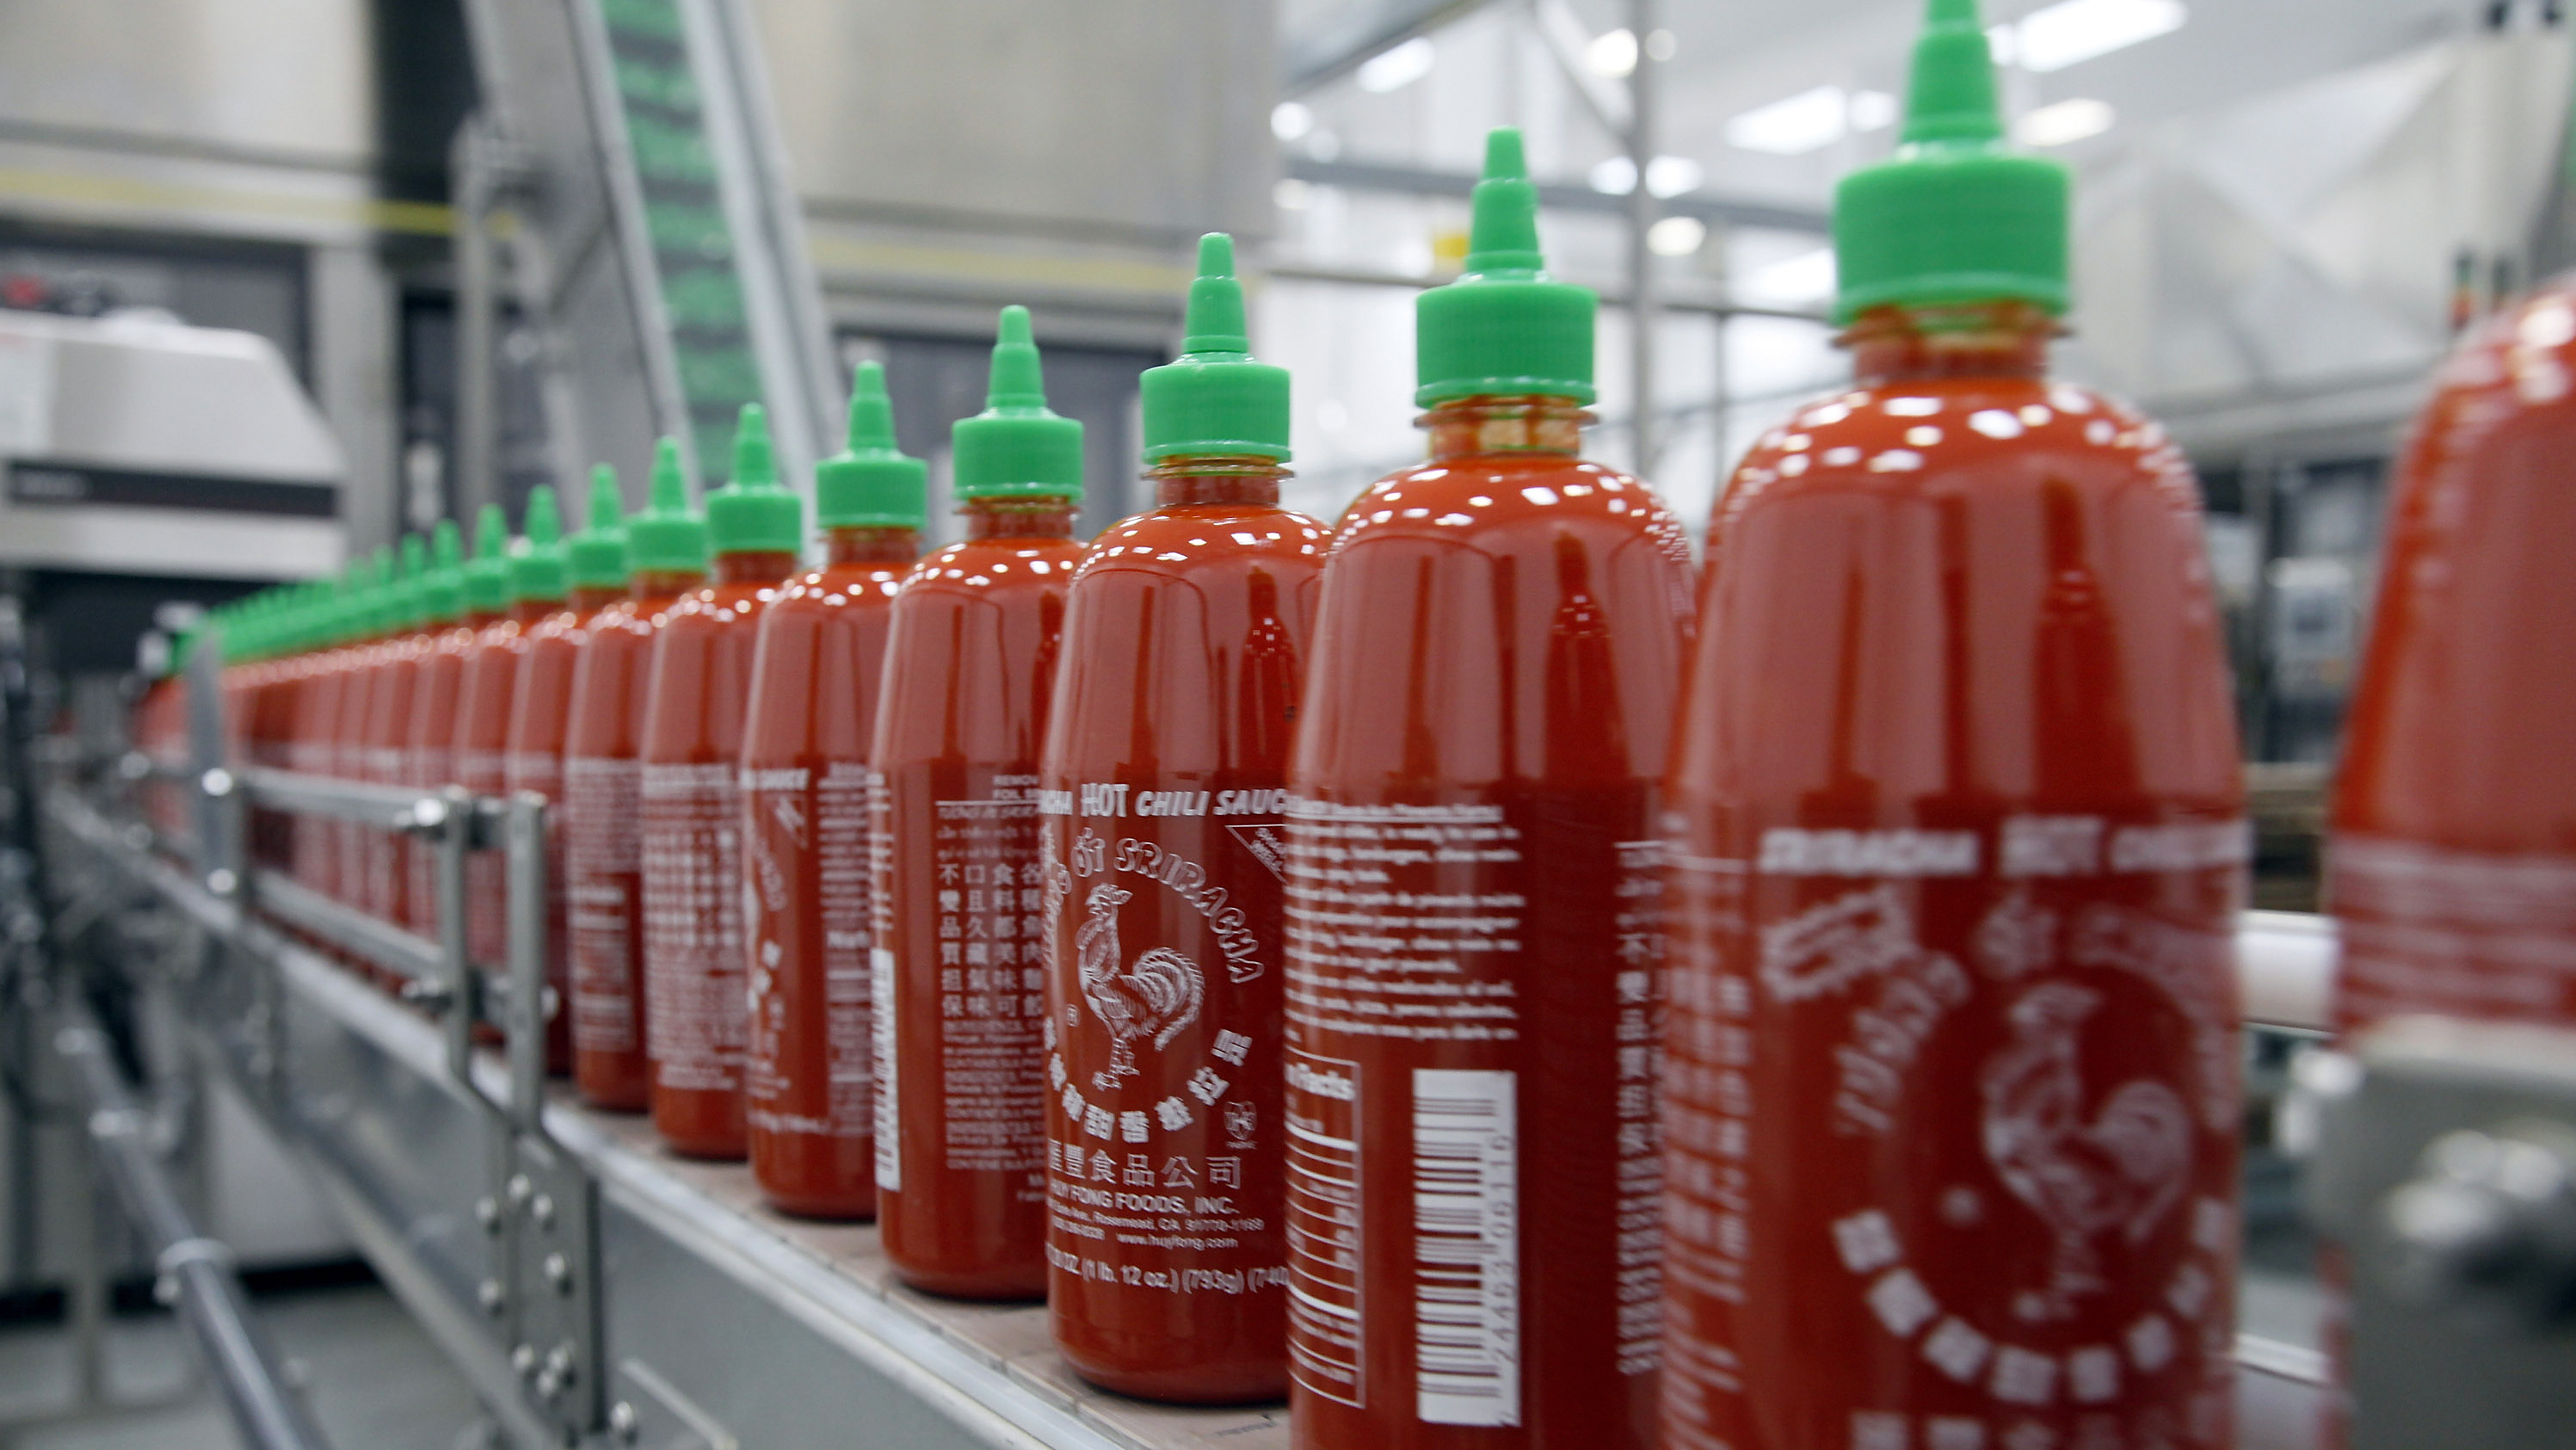 Sriracha chili sauce is produced at the Huy Fong Foods factory in Irwindale, Calif. CEO David Tran has been at odds with the local city council over the smells emitted by the sauce factory. Photo: Nick Ut/AP